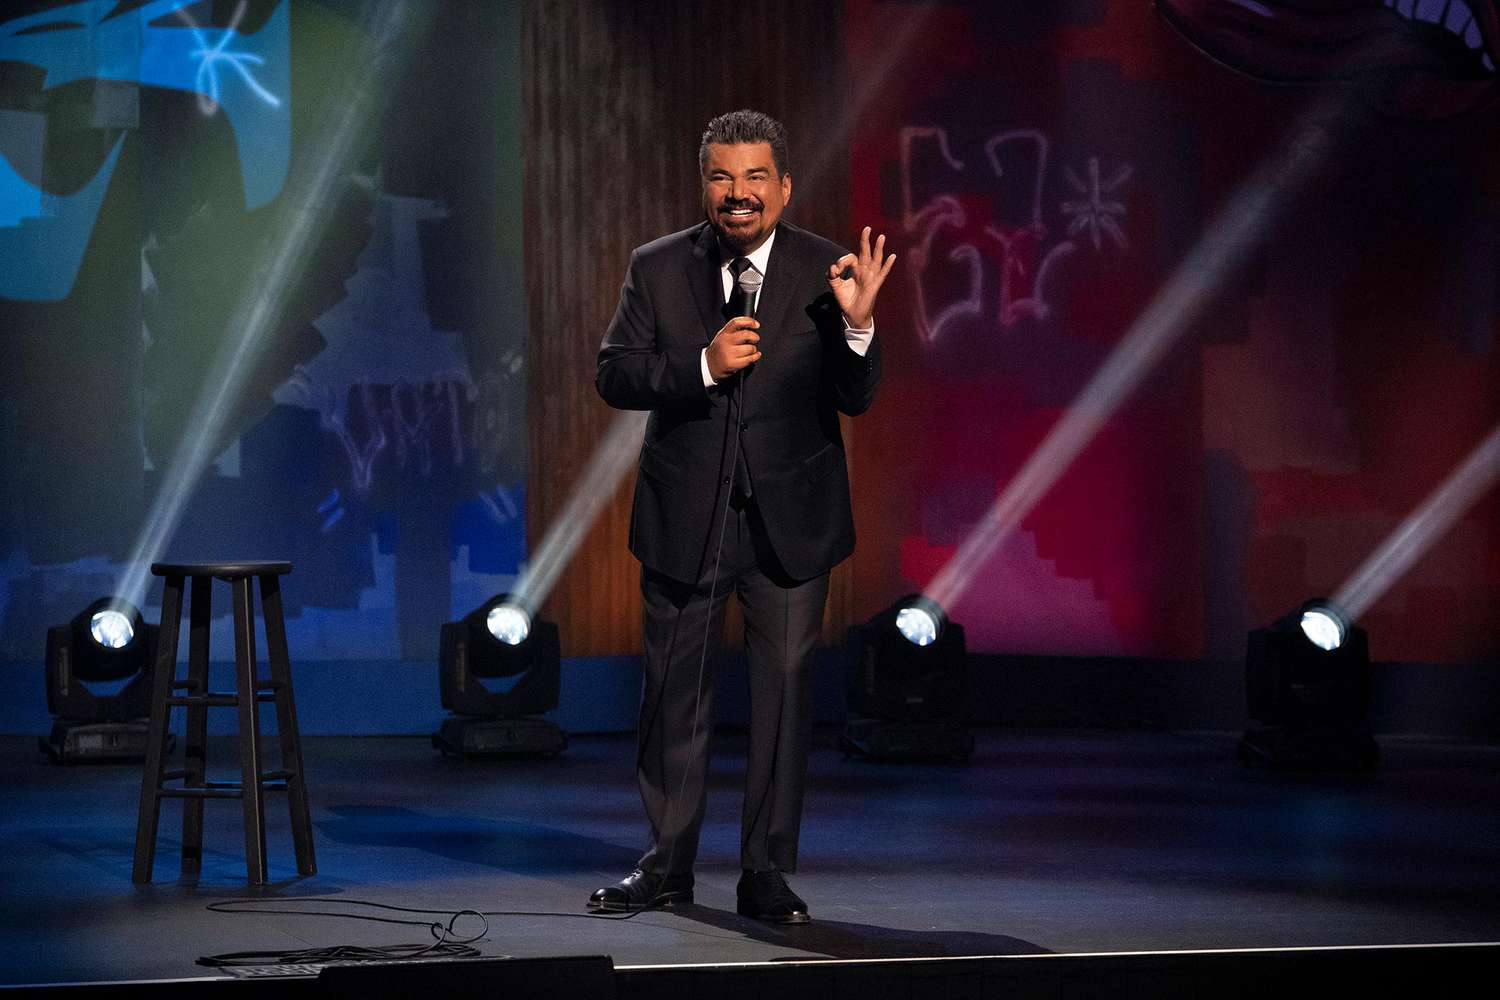 George Lopez Walks Out of Show, Leaving Fans and Venue Stunned